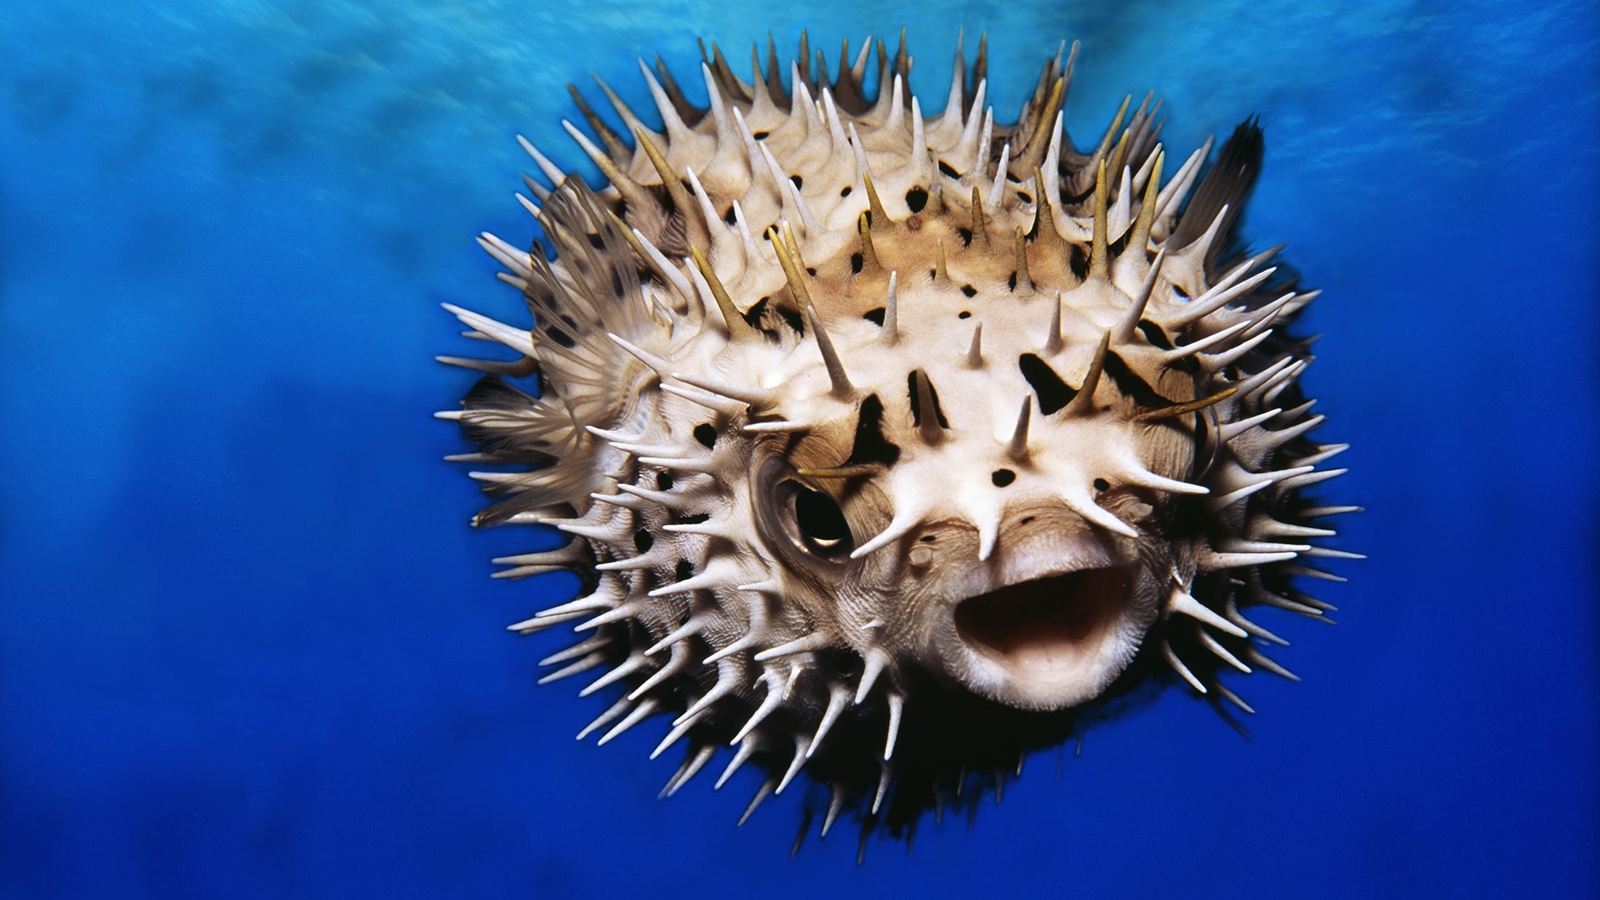 beautiful thorns: Let's Not Be Puffer Fish!